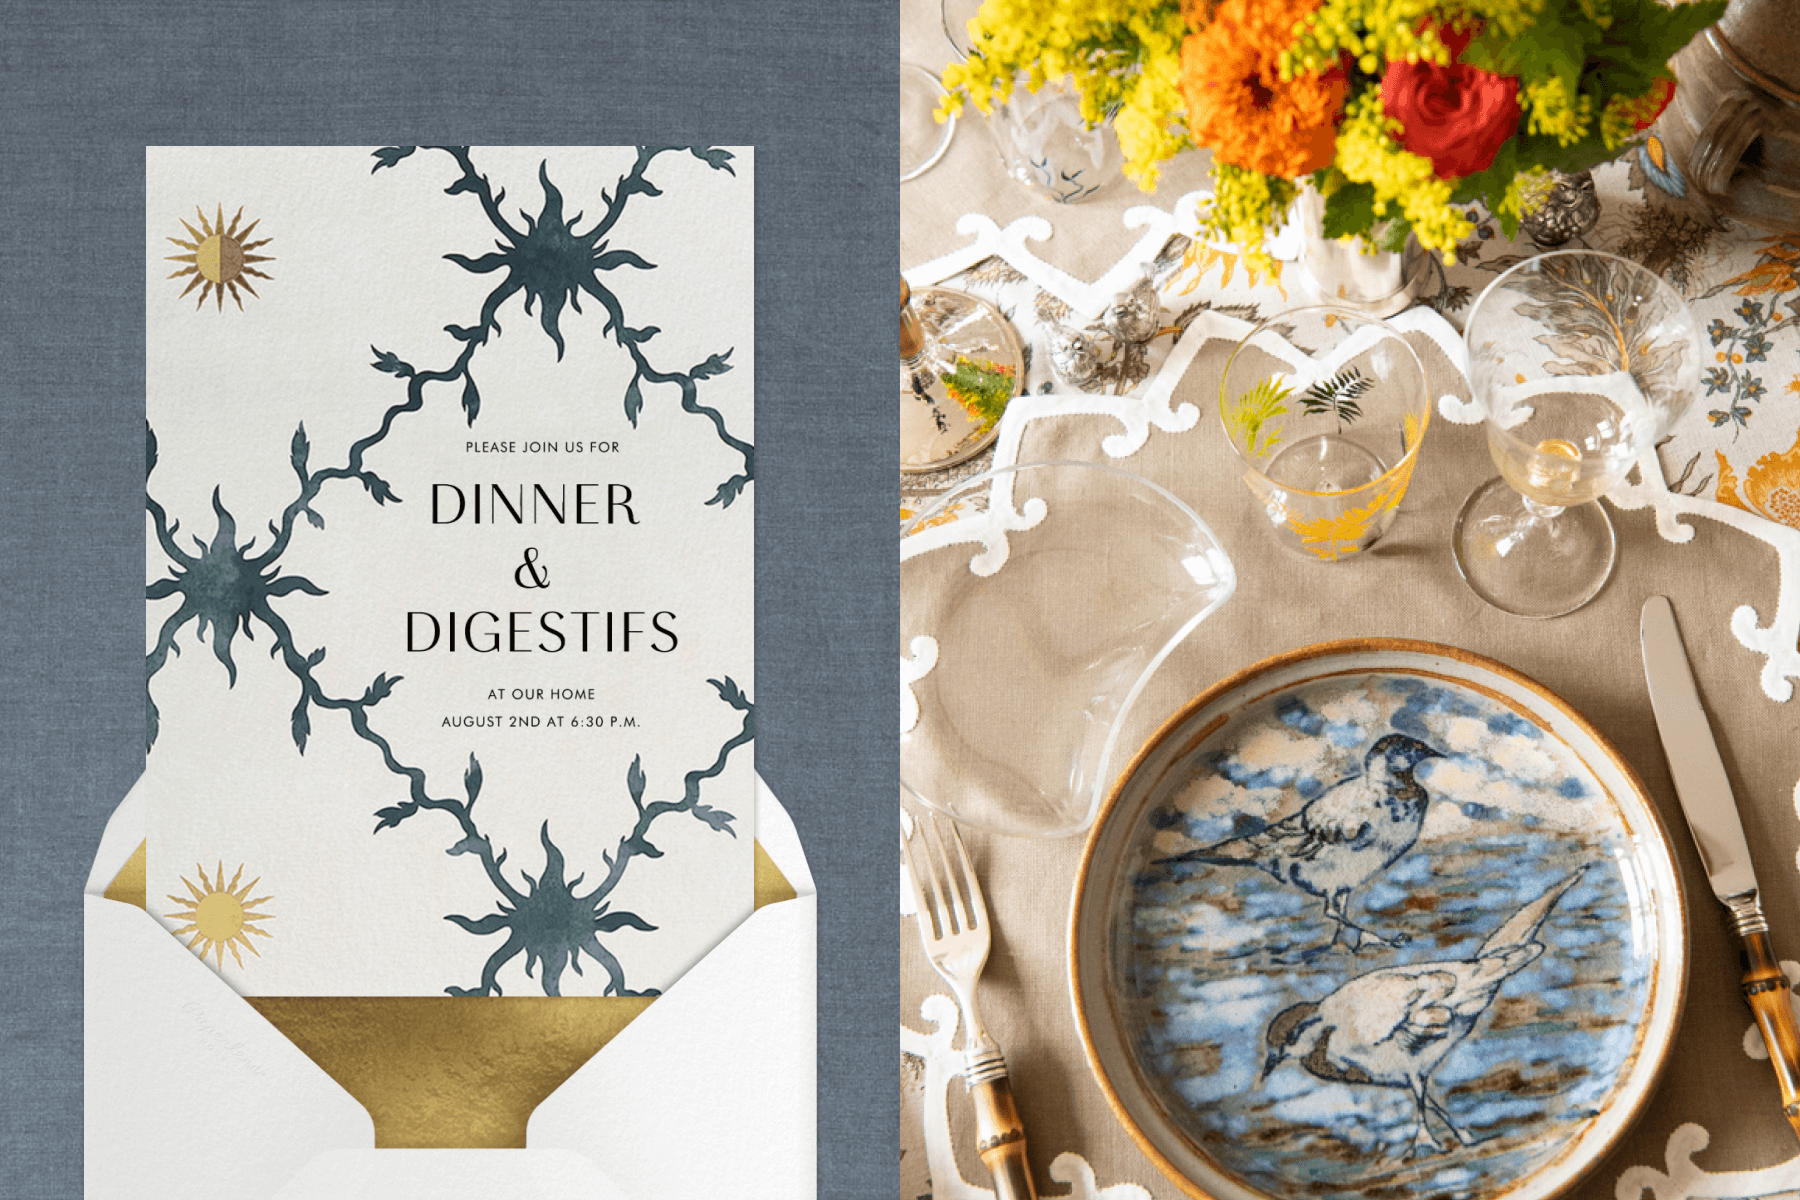 Left: Dinner party invitation with white background and dark grey geometric design, coming out of a white envelope with gold liner. Right: Crop of dinner table setting with a marbled blue plate and autumnal flowers. 